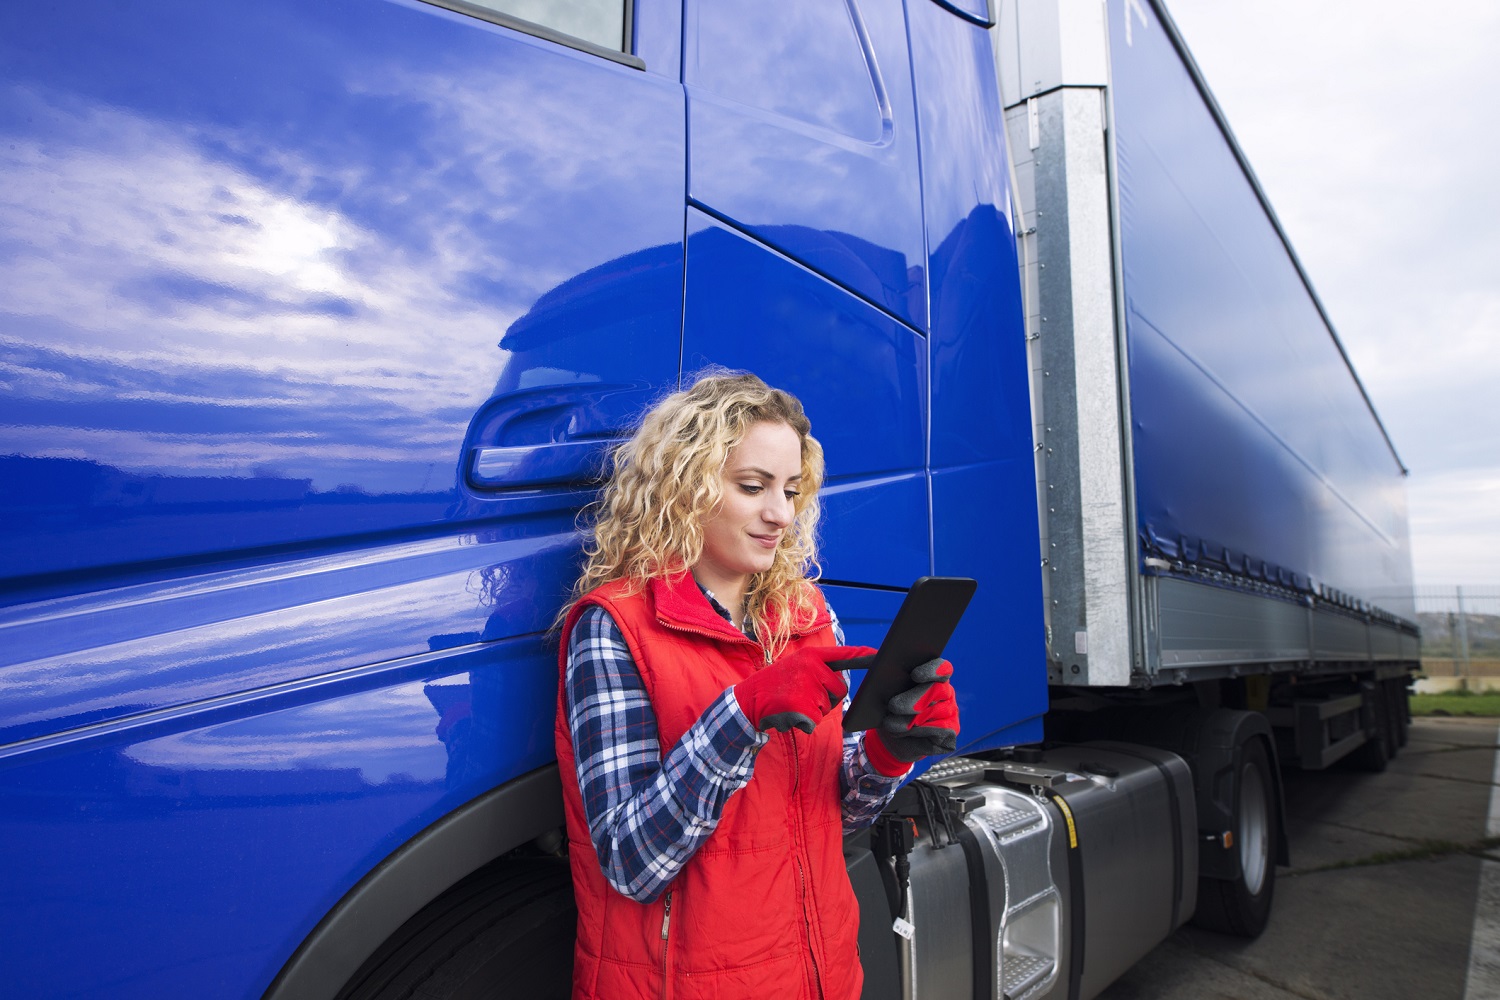 How to Fill Out a CDL Driving Log Book for Truck Drivers - DOT Logbook